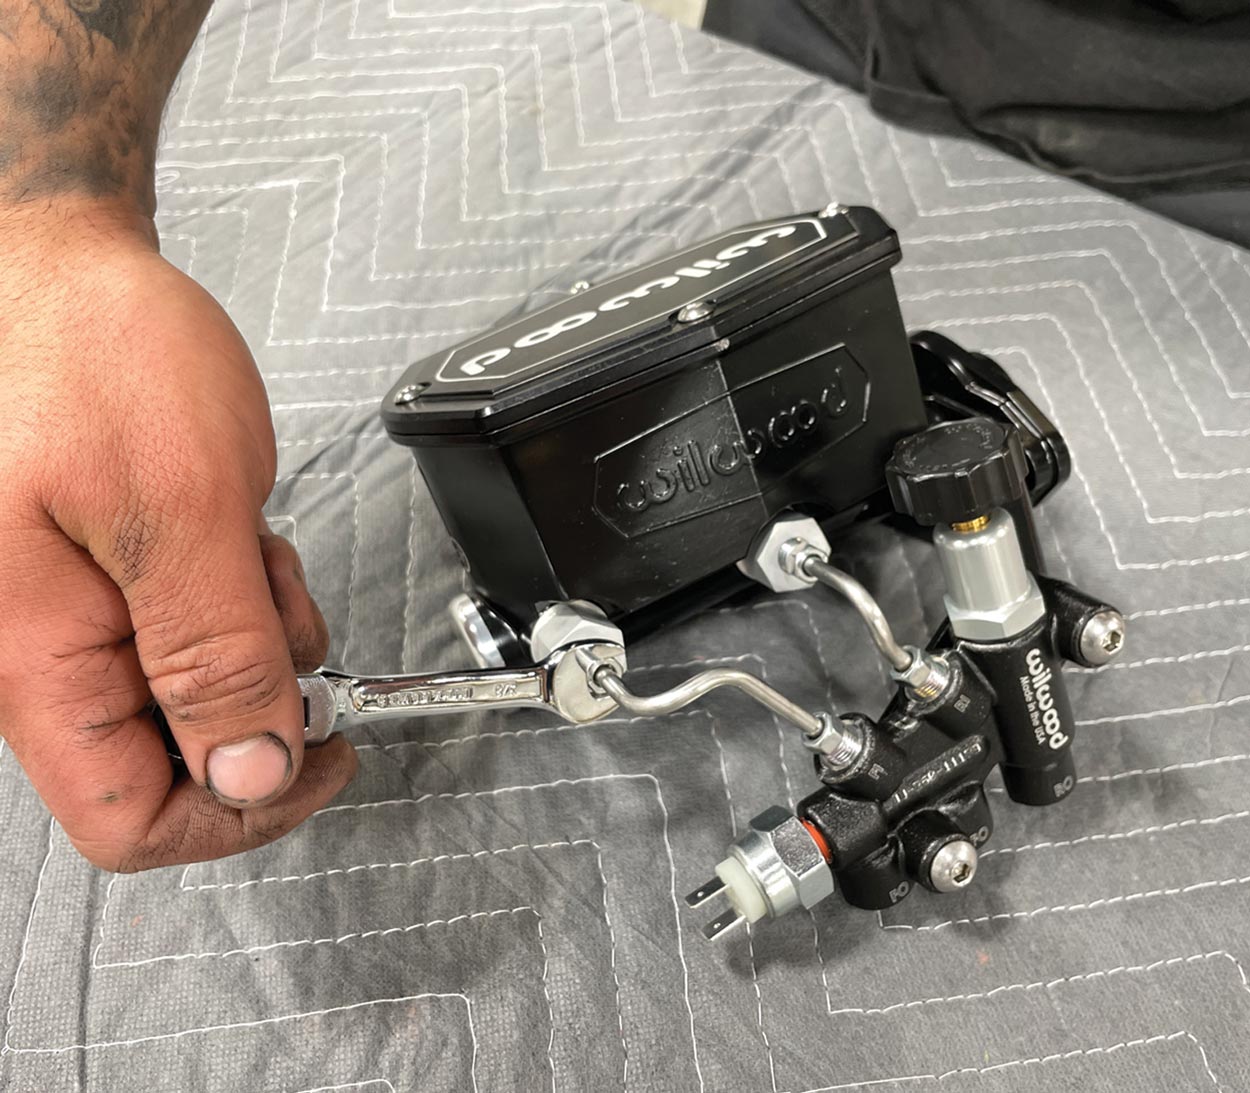 Wilwood's latest compact tandem-chamber master cylinder fully assembled